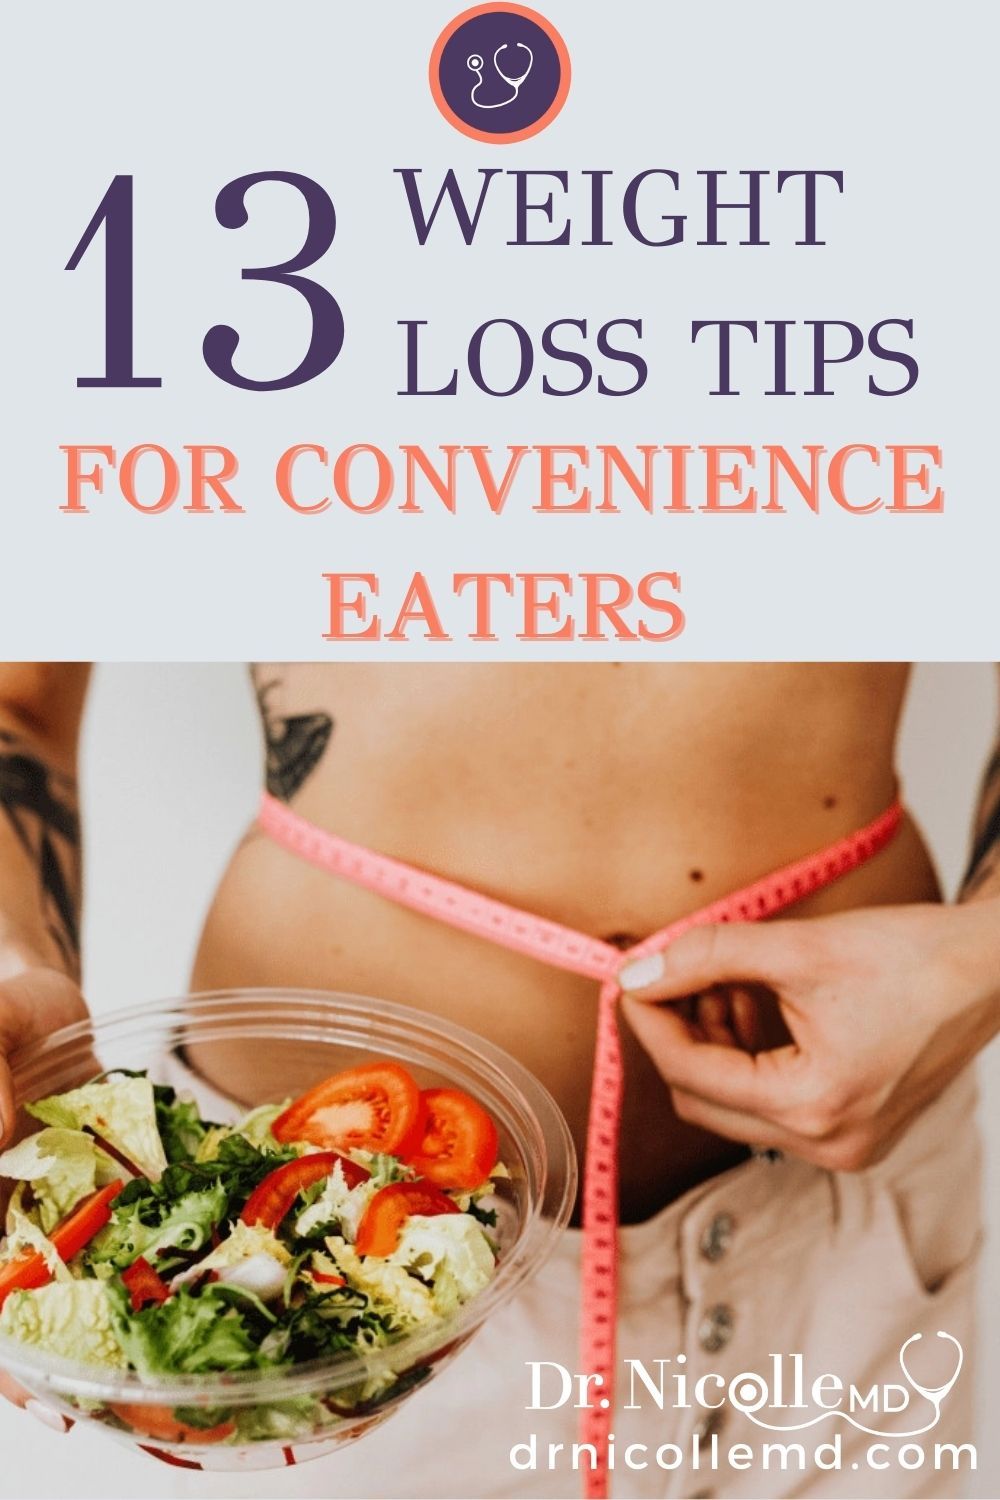 13 Weight Loss Tips For Convenience Eaters